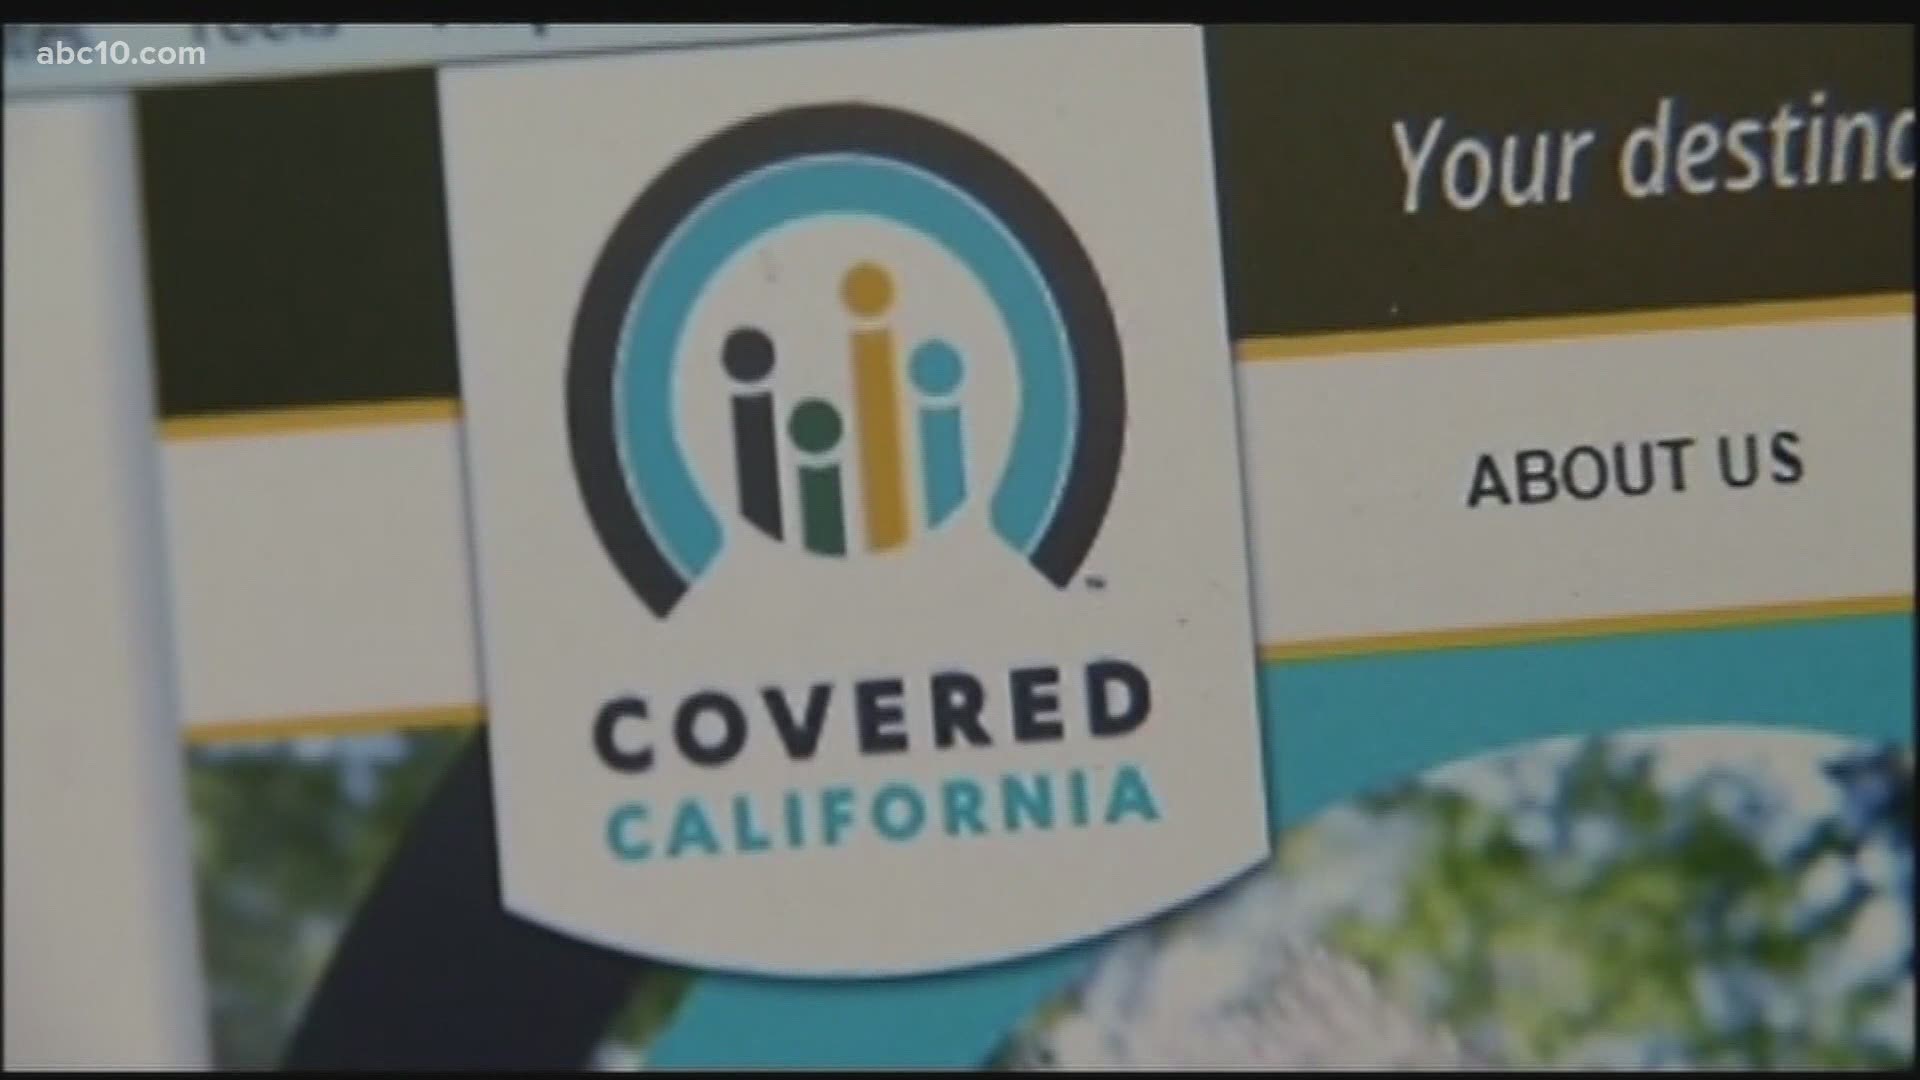 Affordable Care Act & Covered California: How will your health care be affected?